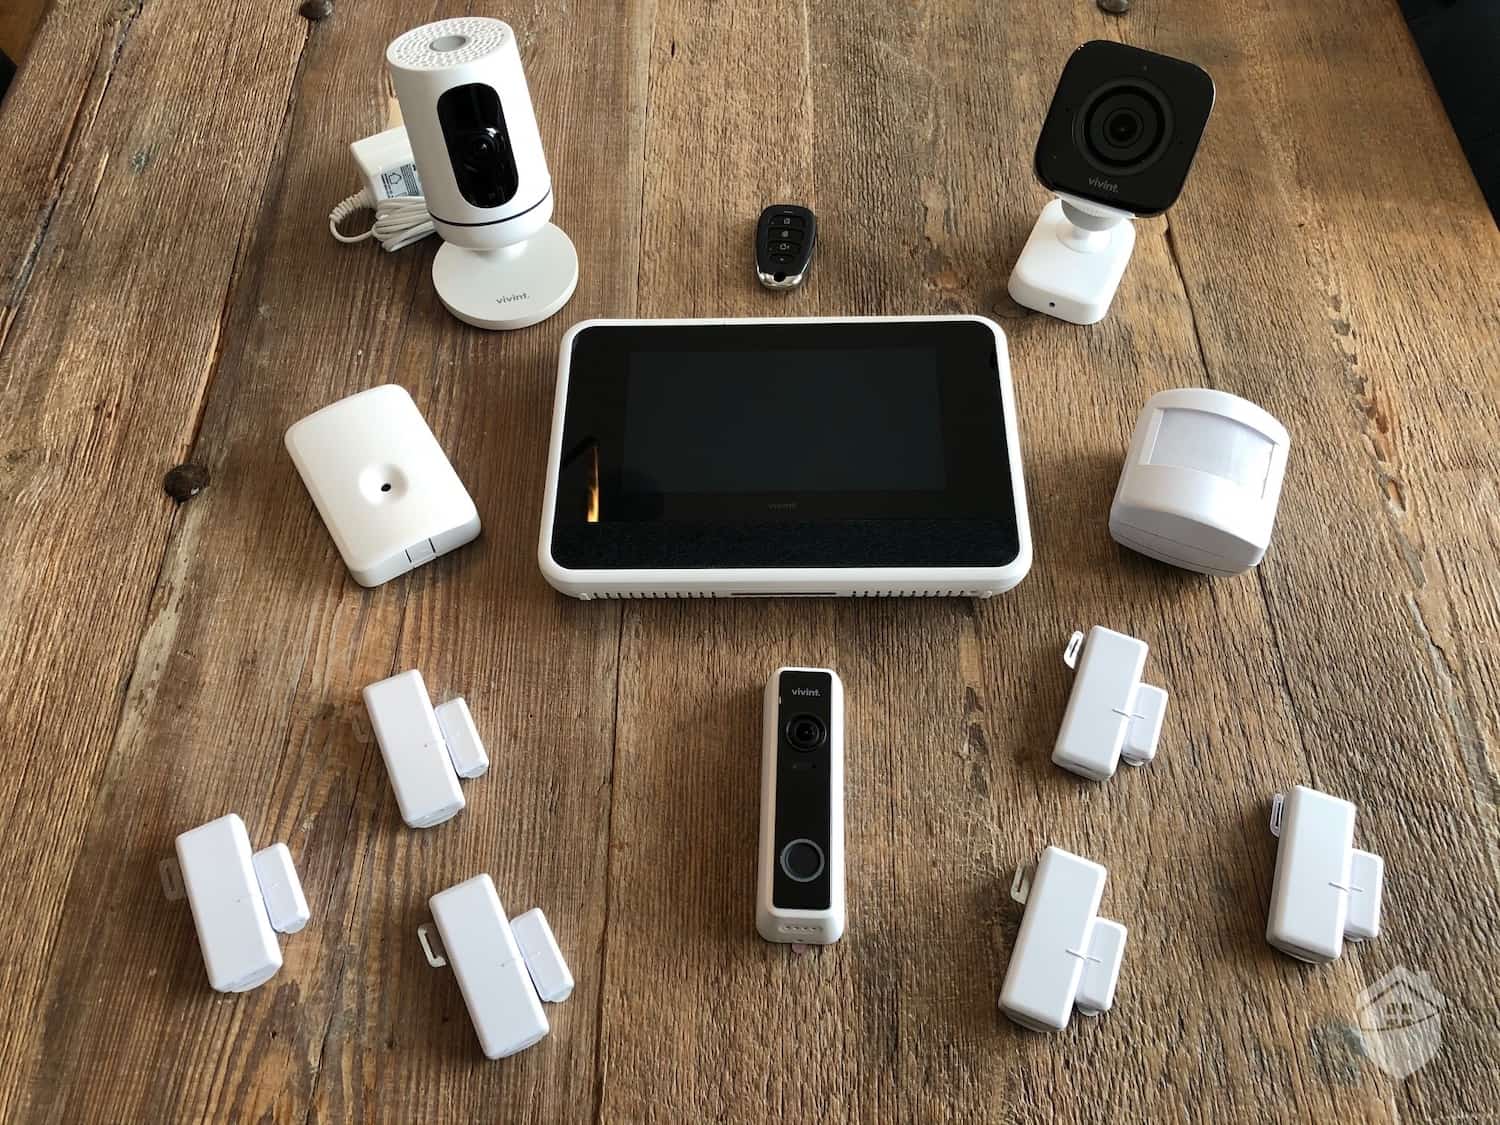 Vivint Smart Home Review | Read About One of Our Top Picks of 2020